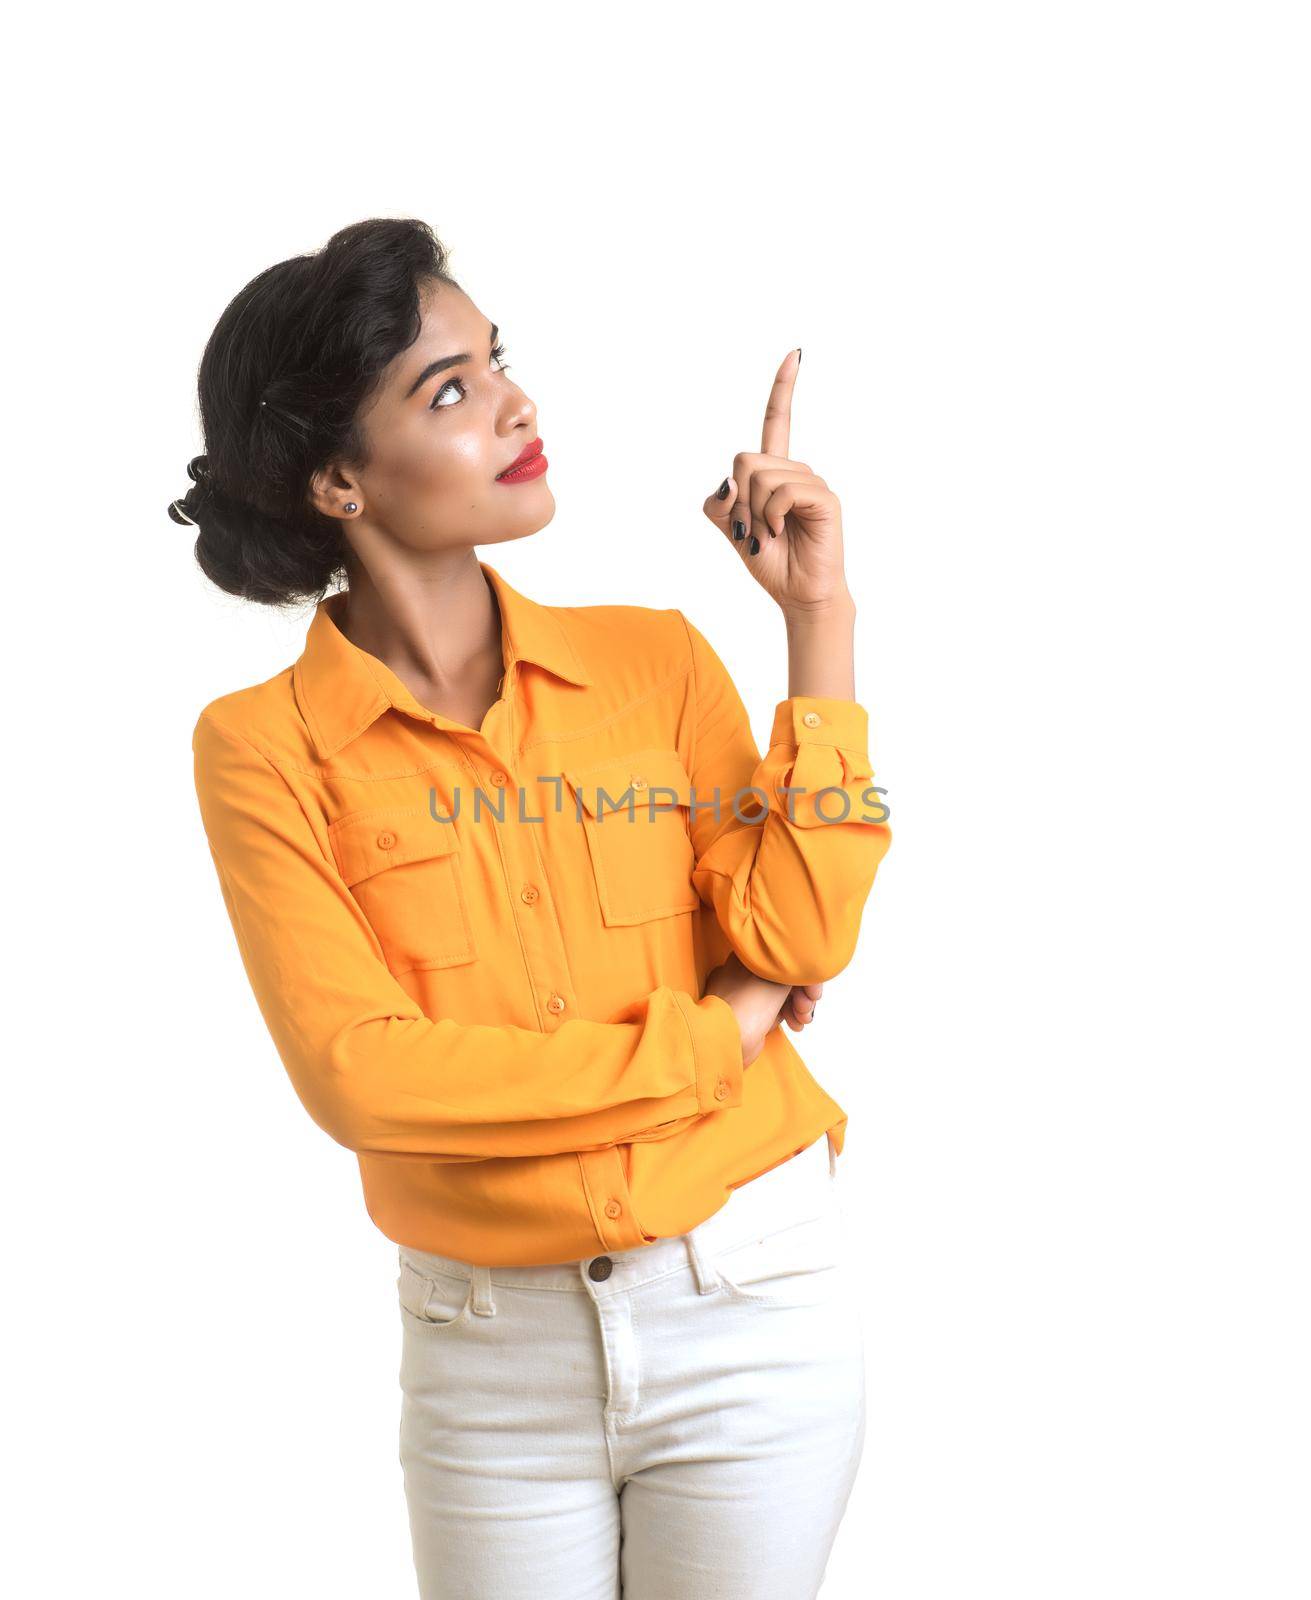 Young smiling girl pointing fingers to copy space on a white background